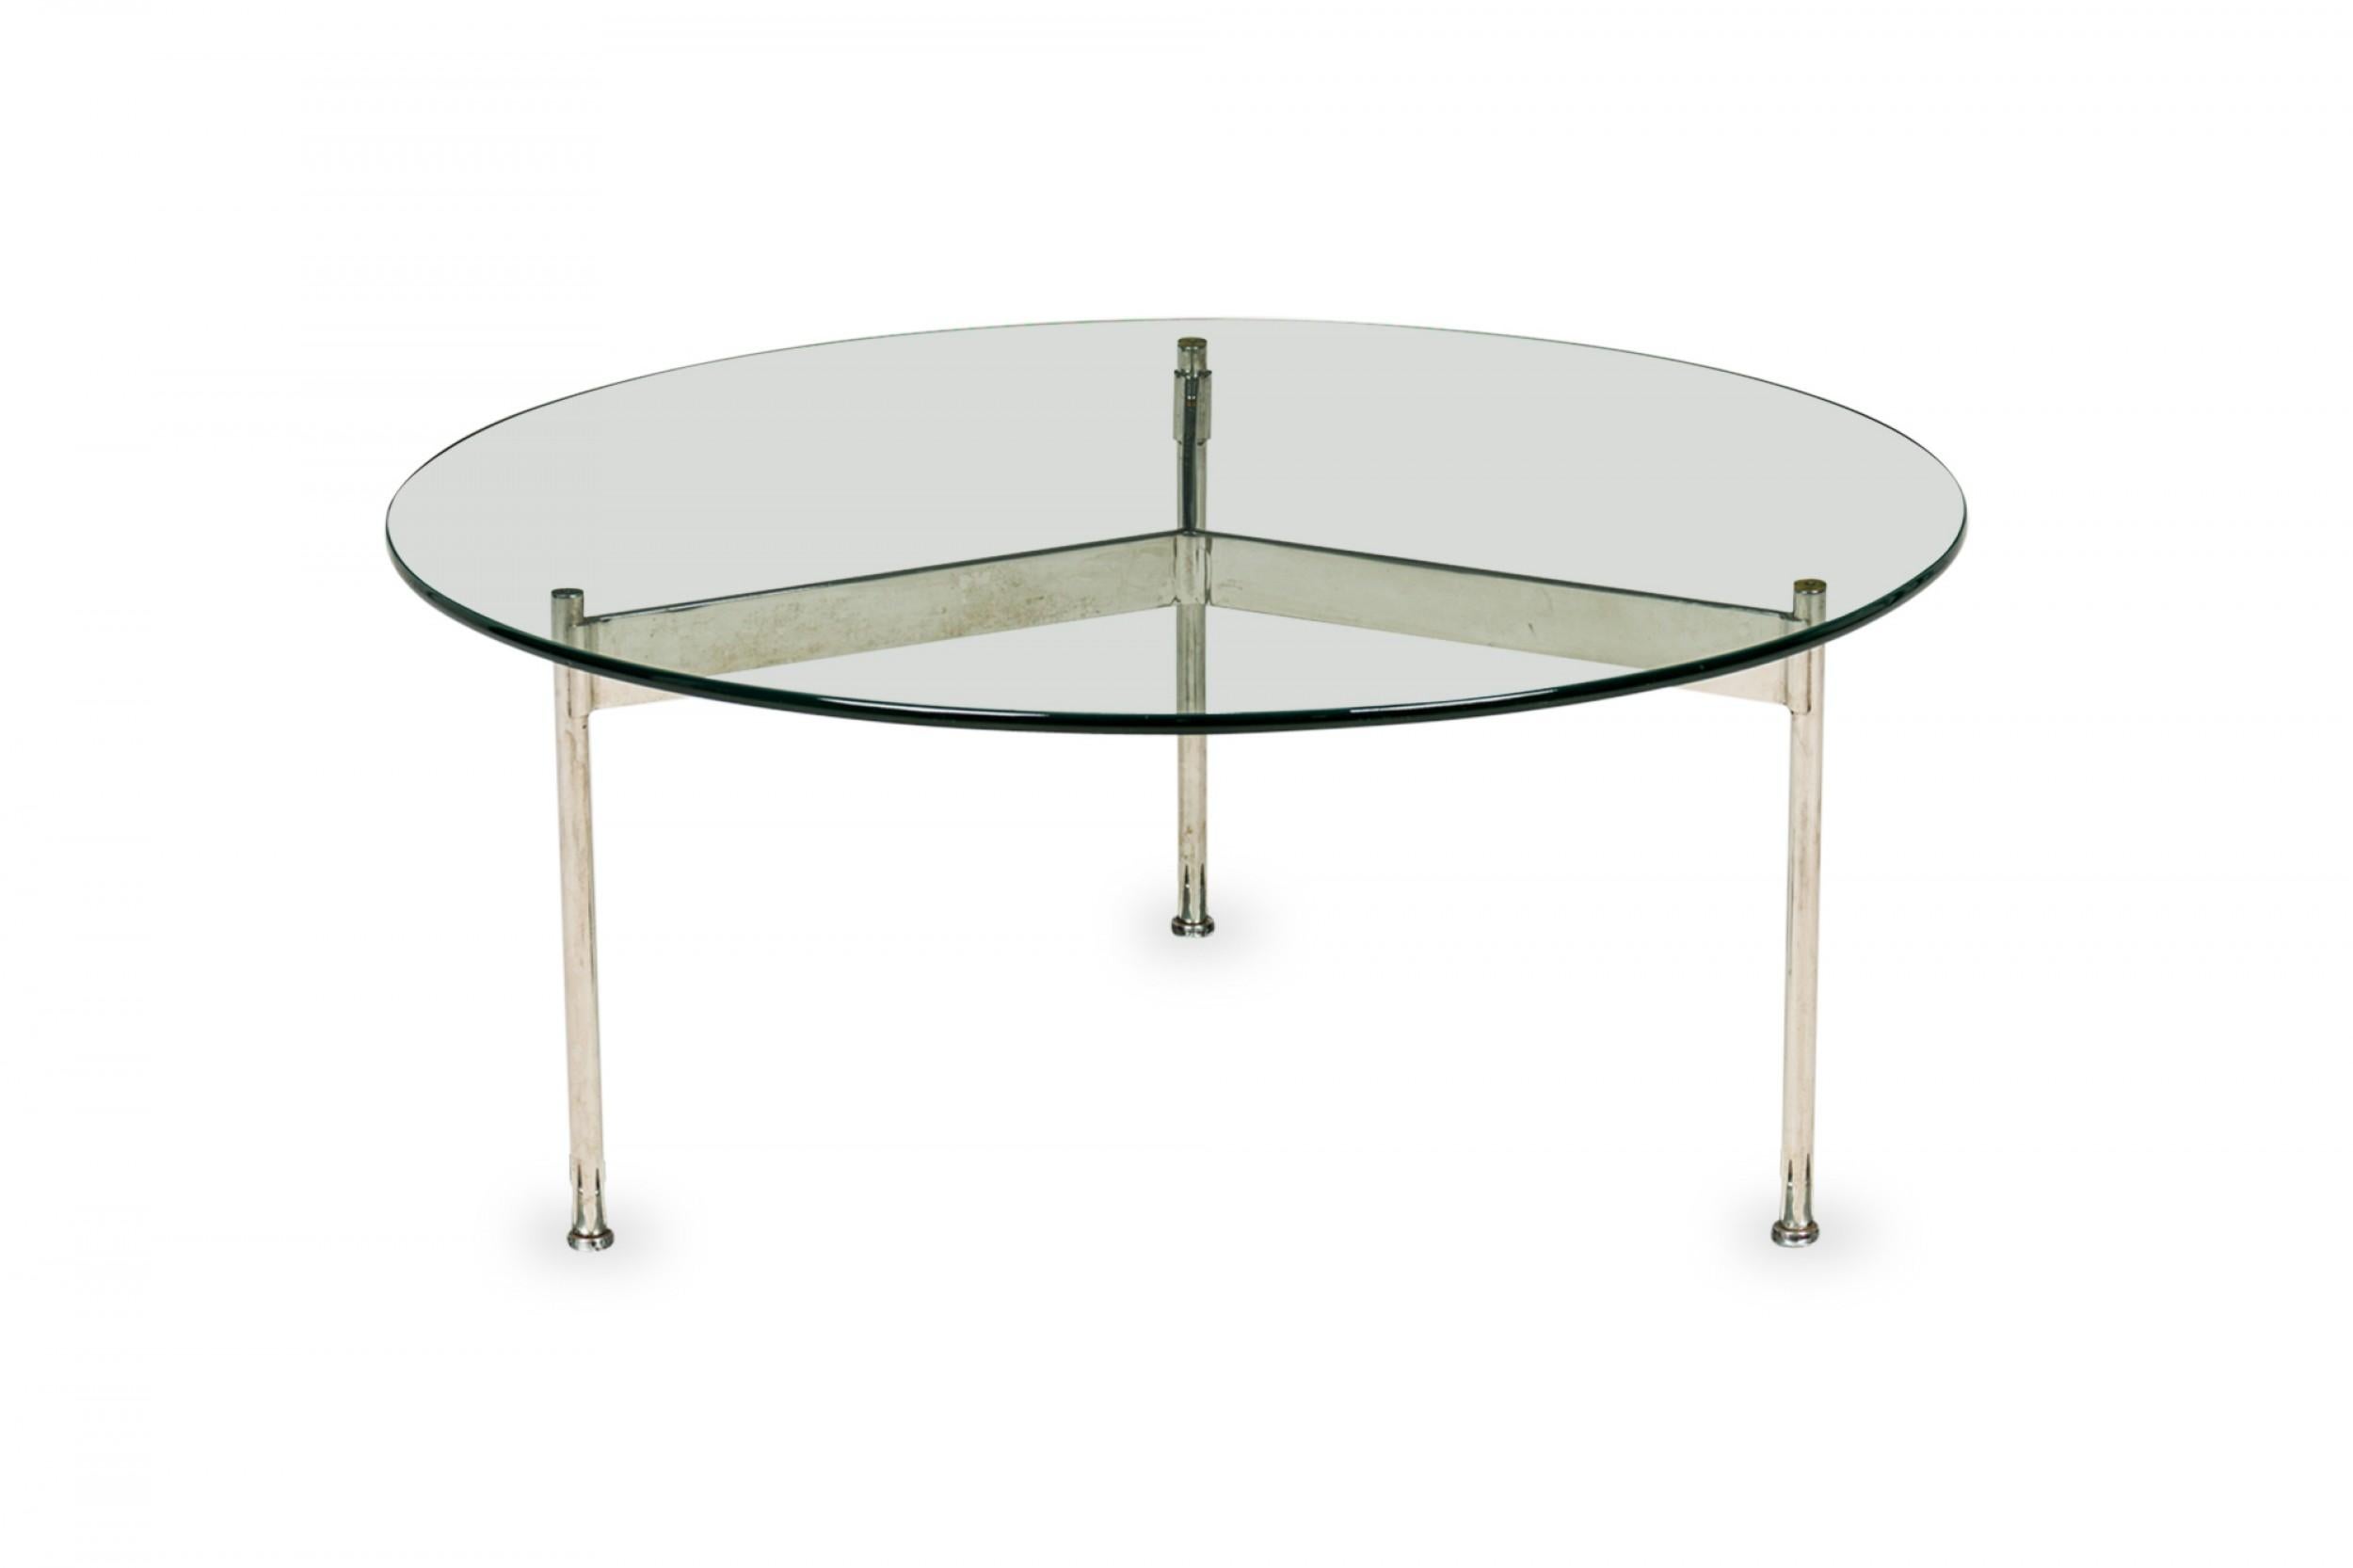 Ward Bennett  Circular Glass and Chrome Plated Steel Coffee Table In Good Condition For Sale In New York, NY